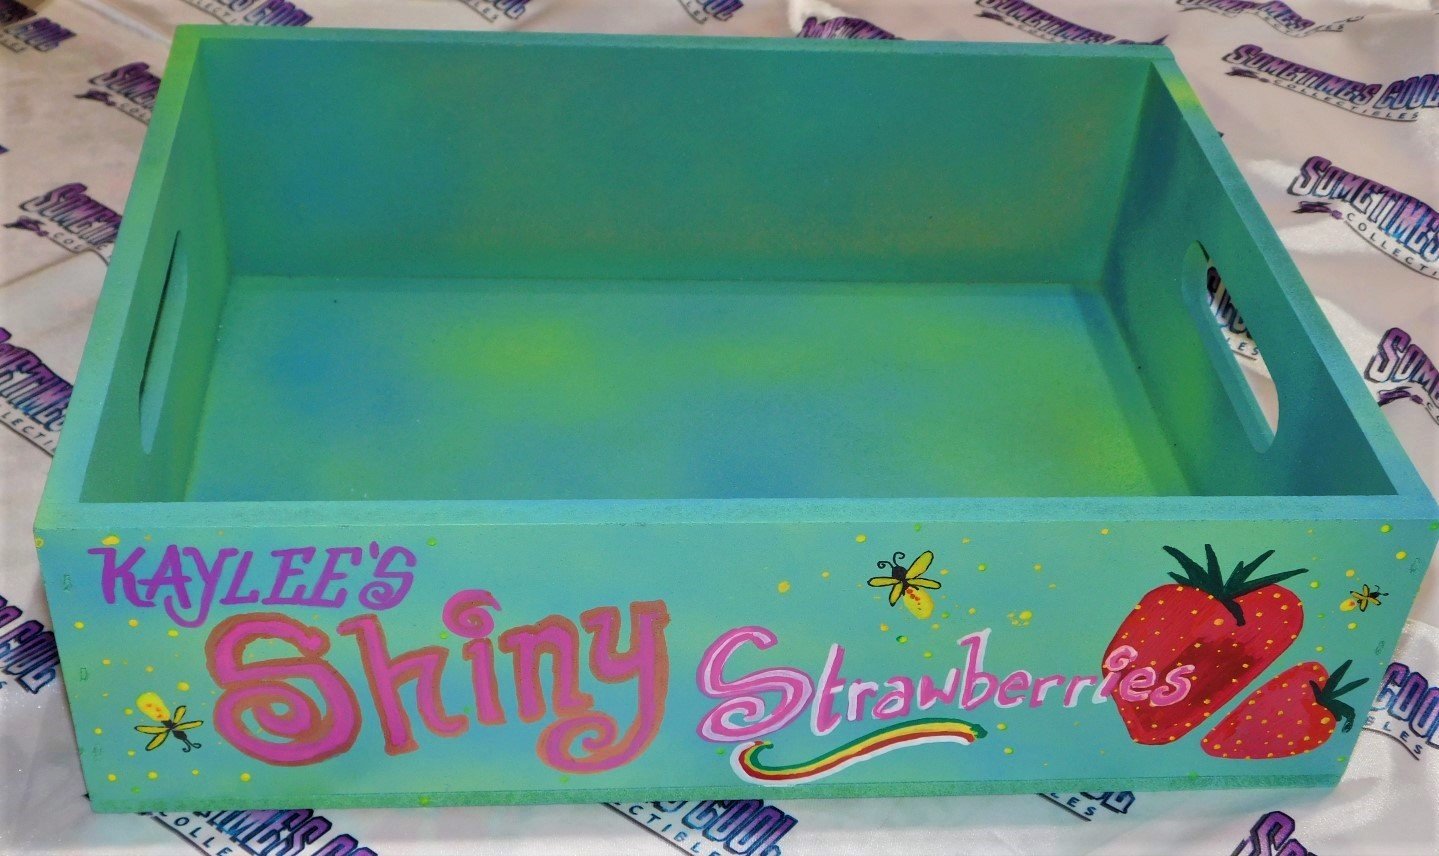 Kaylee's Shiny Strawberries Crate